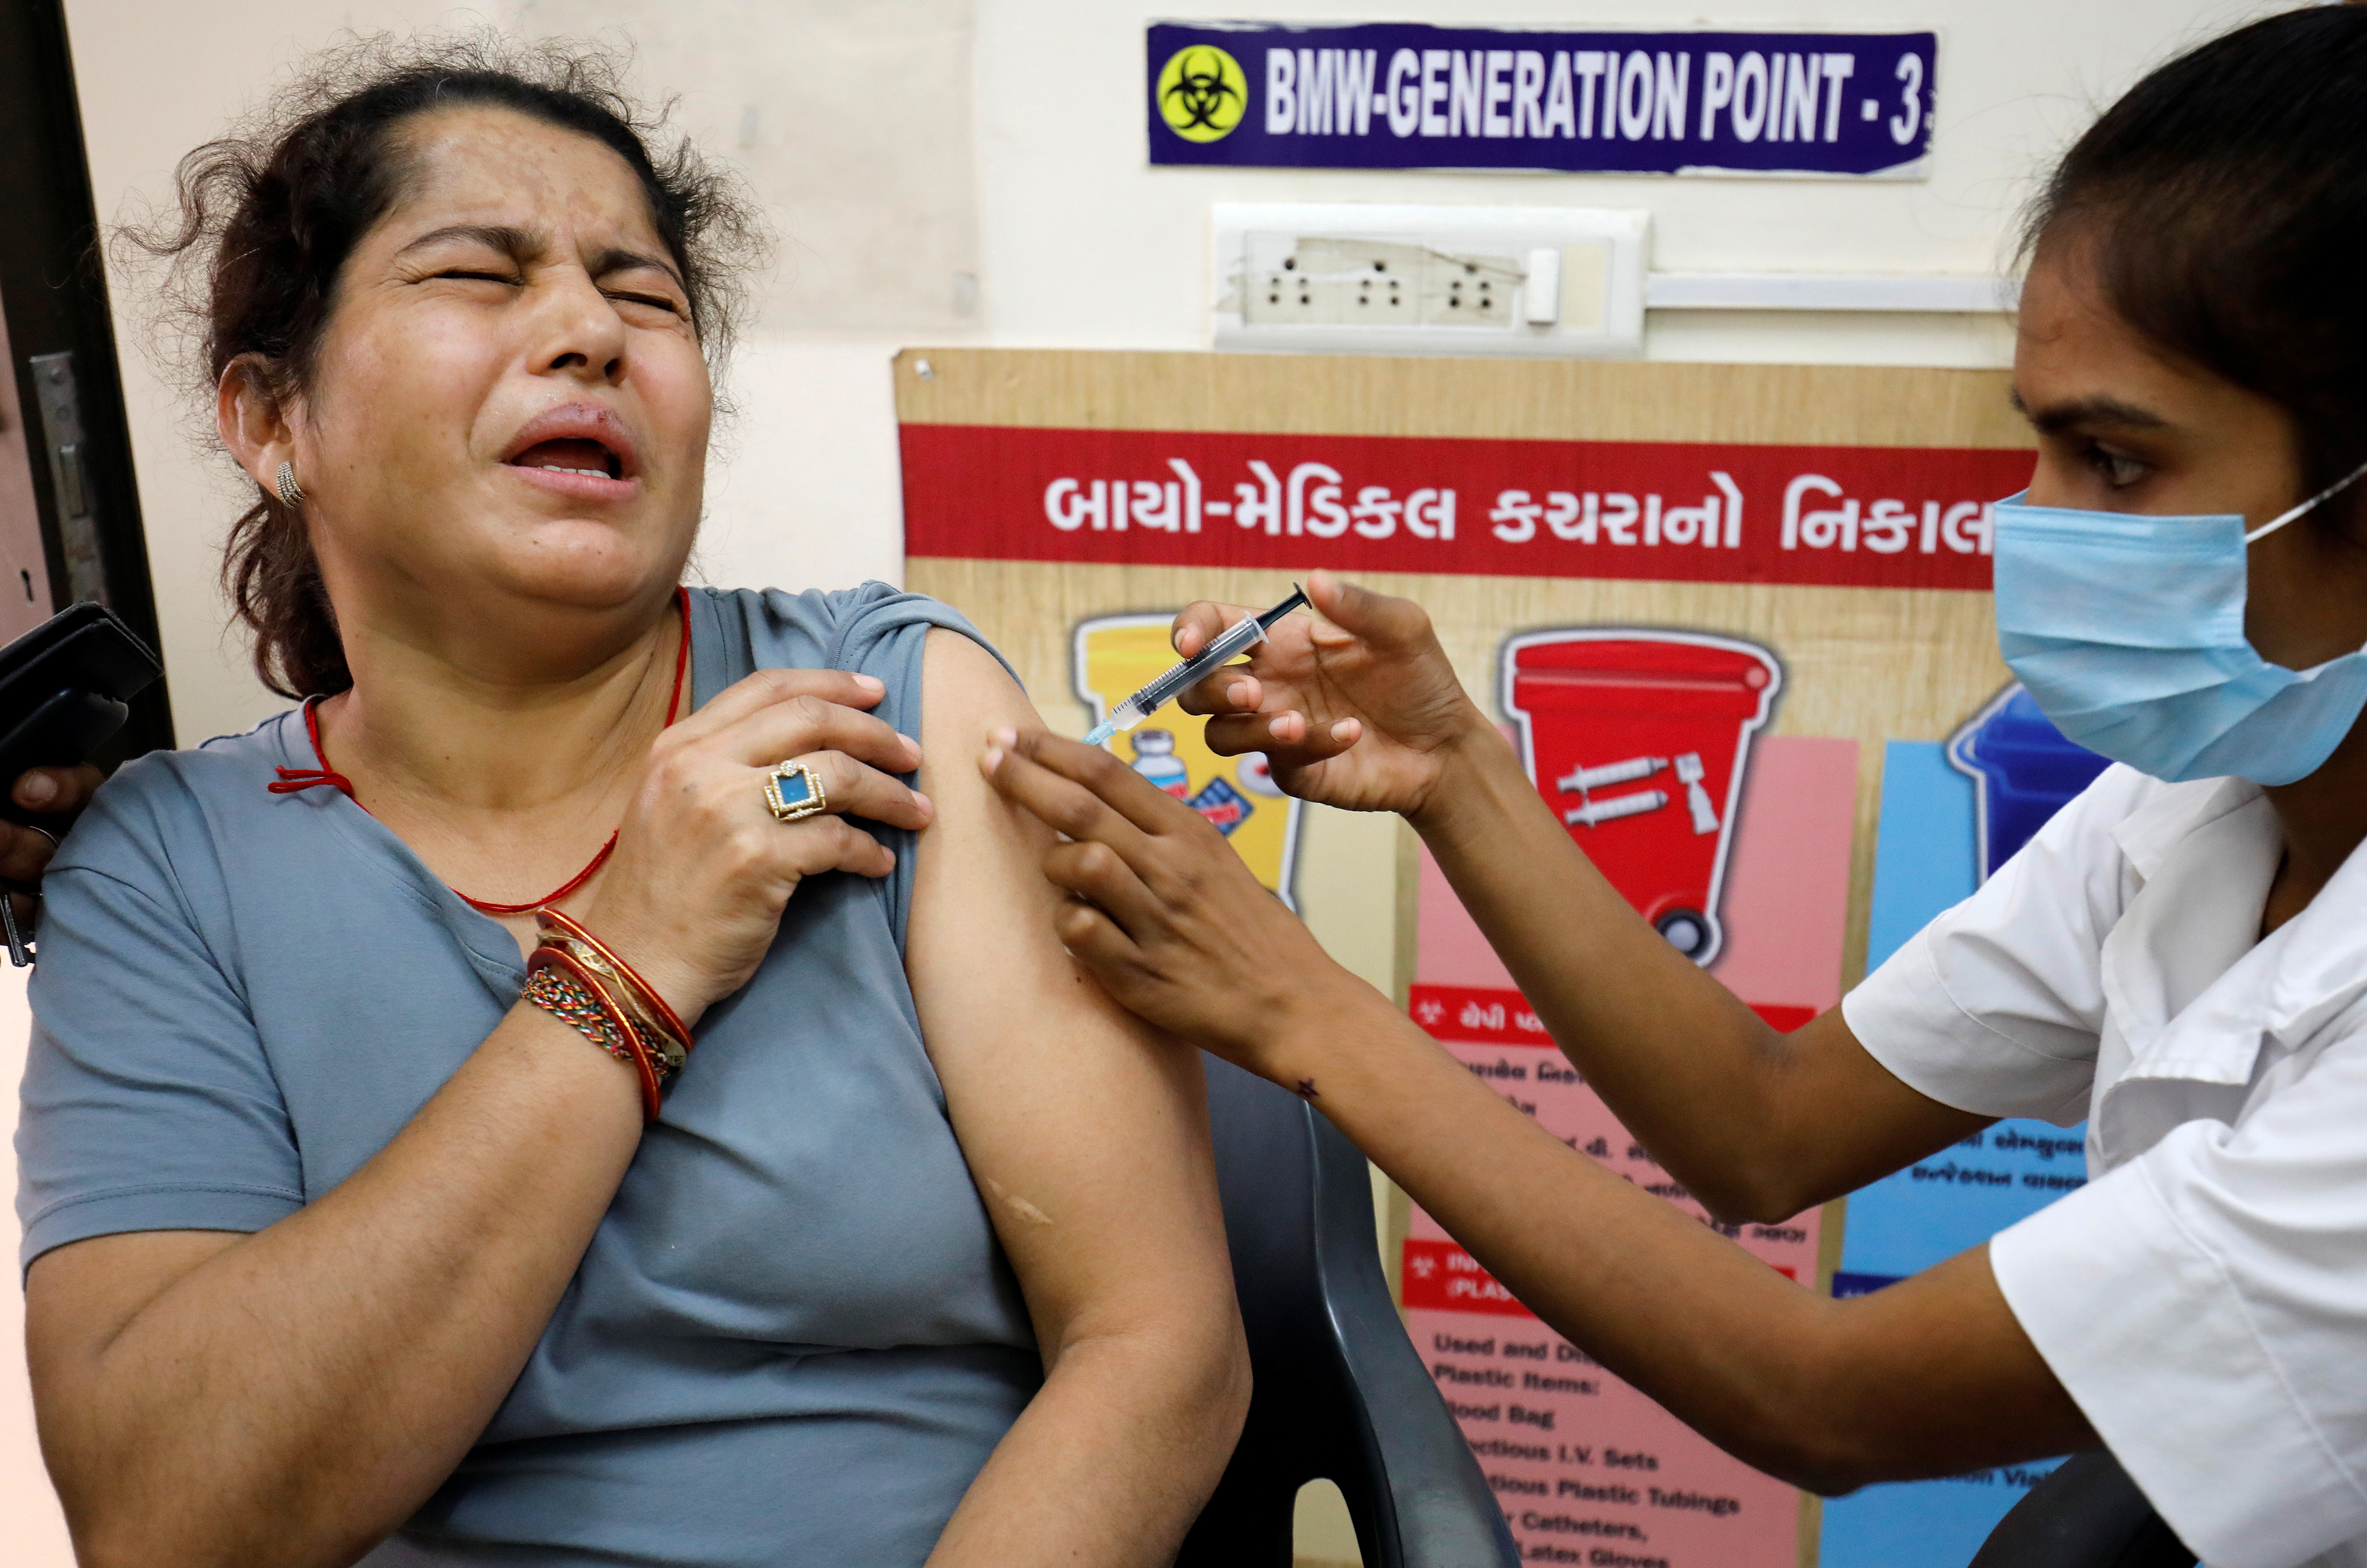 A woman reacts as she receives a dose of the COVISHIELD vaccine against the coronavirus disease (COVID-19), manufactured by Serum Institute of India, at a vaccination centre in Ahmedabad, India, October 21, 2021. REUTERS/Amit Dave